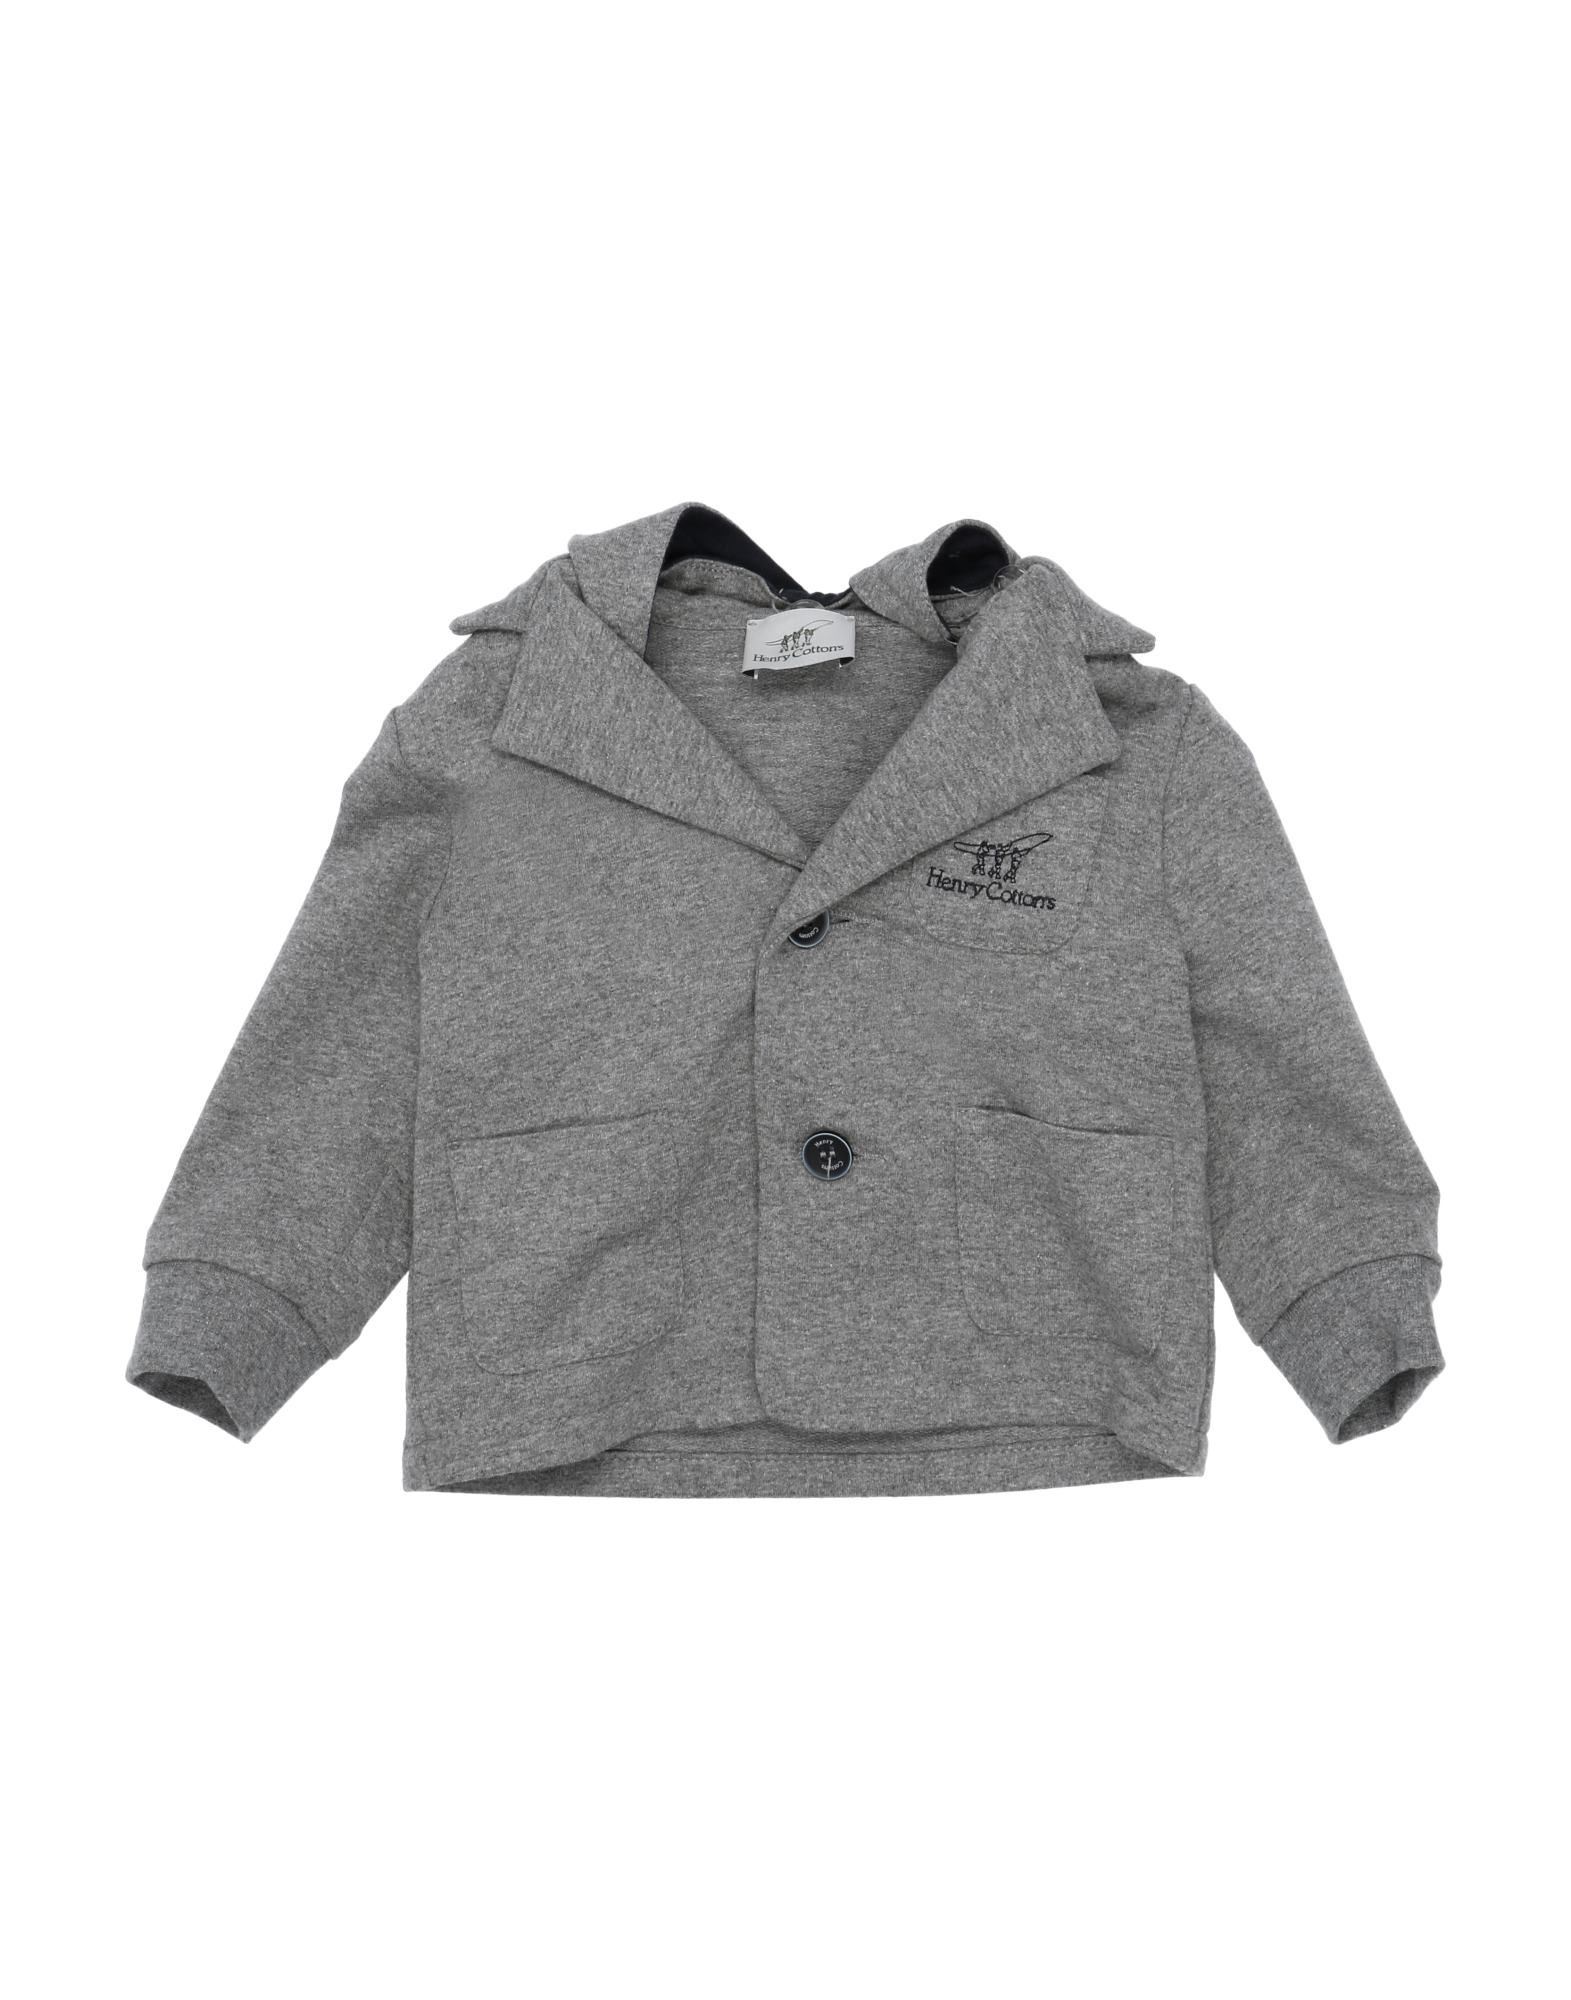 Henry Cotton's Kids' Suit Jackets In Grey